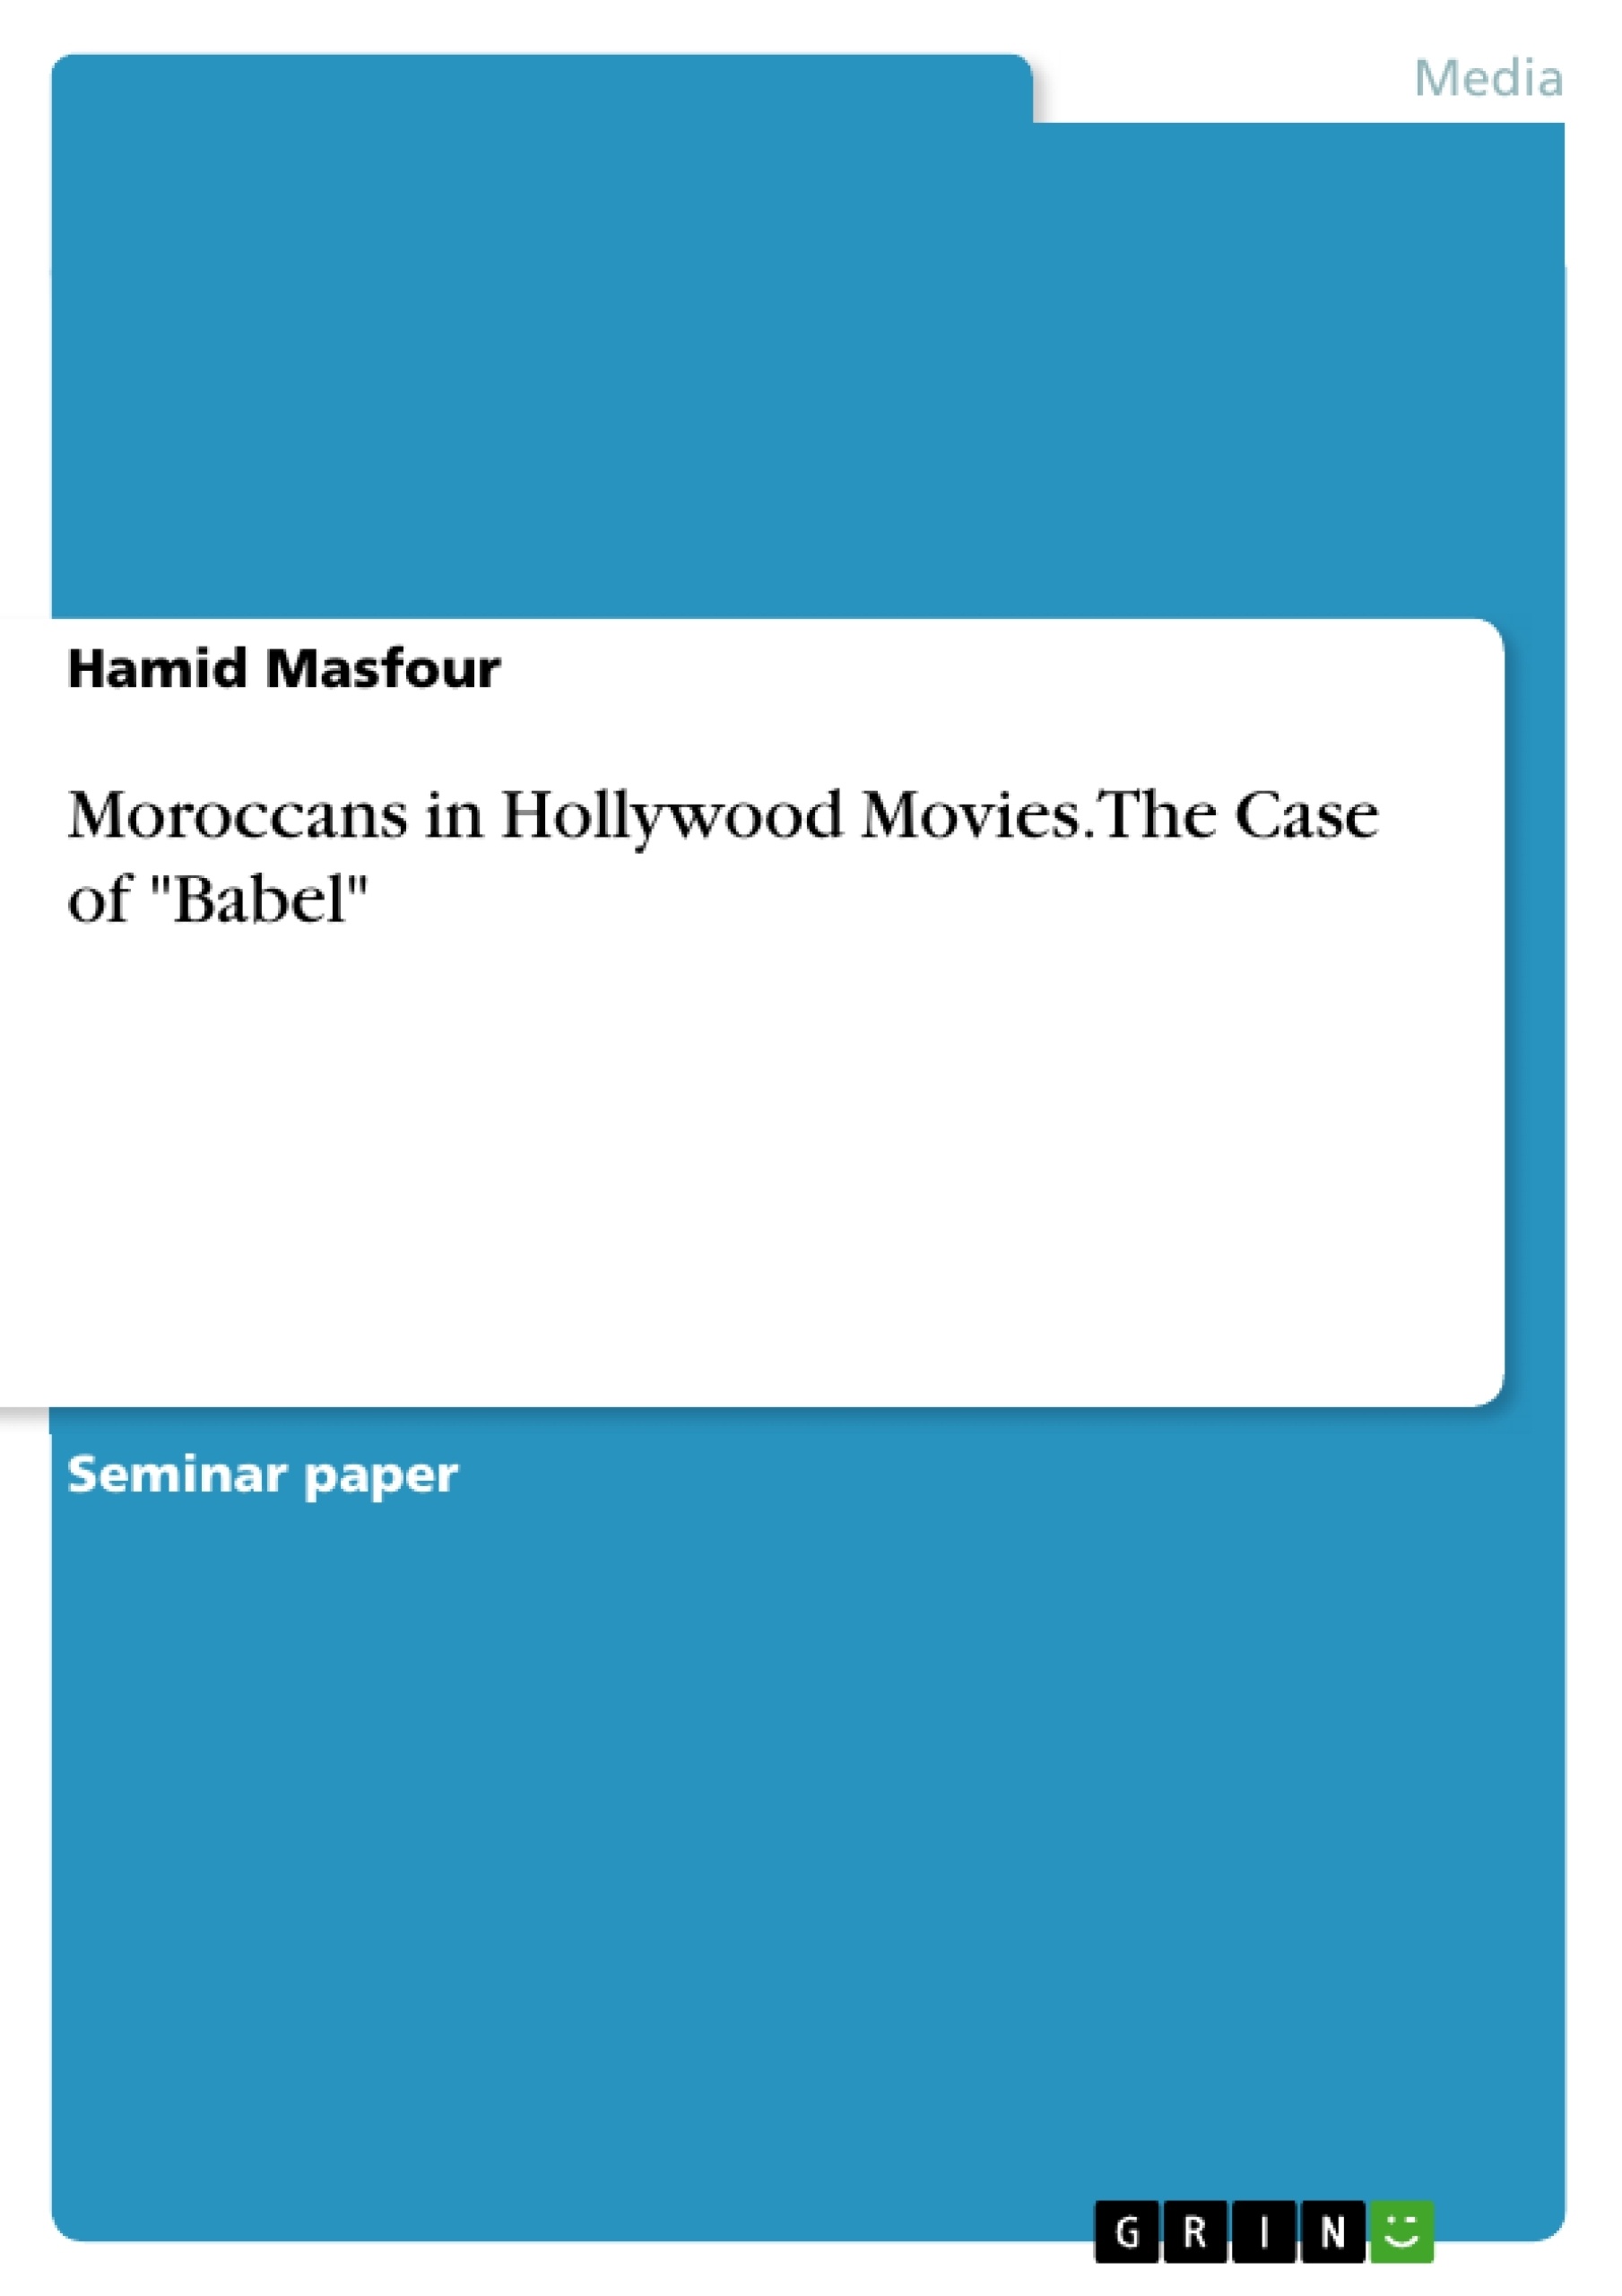 Titel: Moroccans in Hollywood Movies. The Case of "Babel"